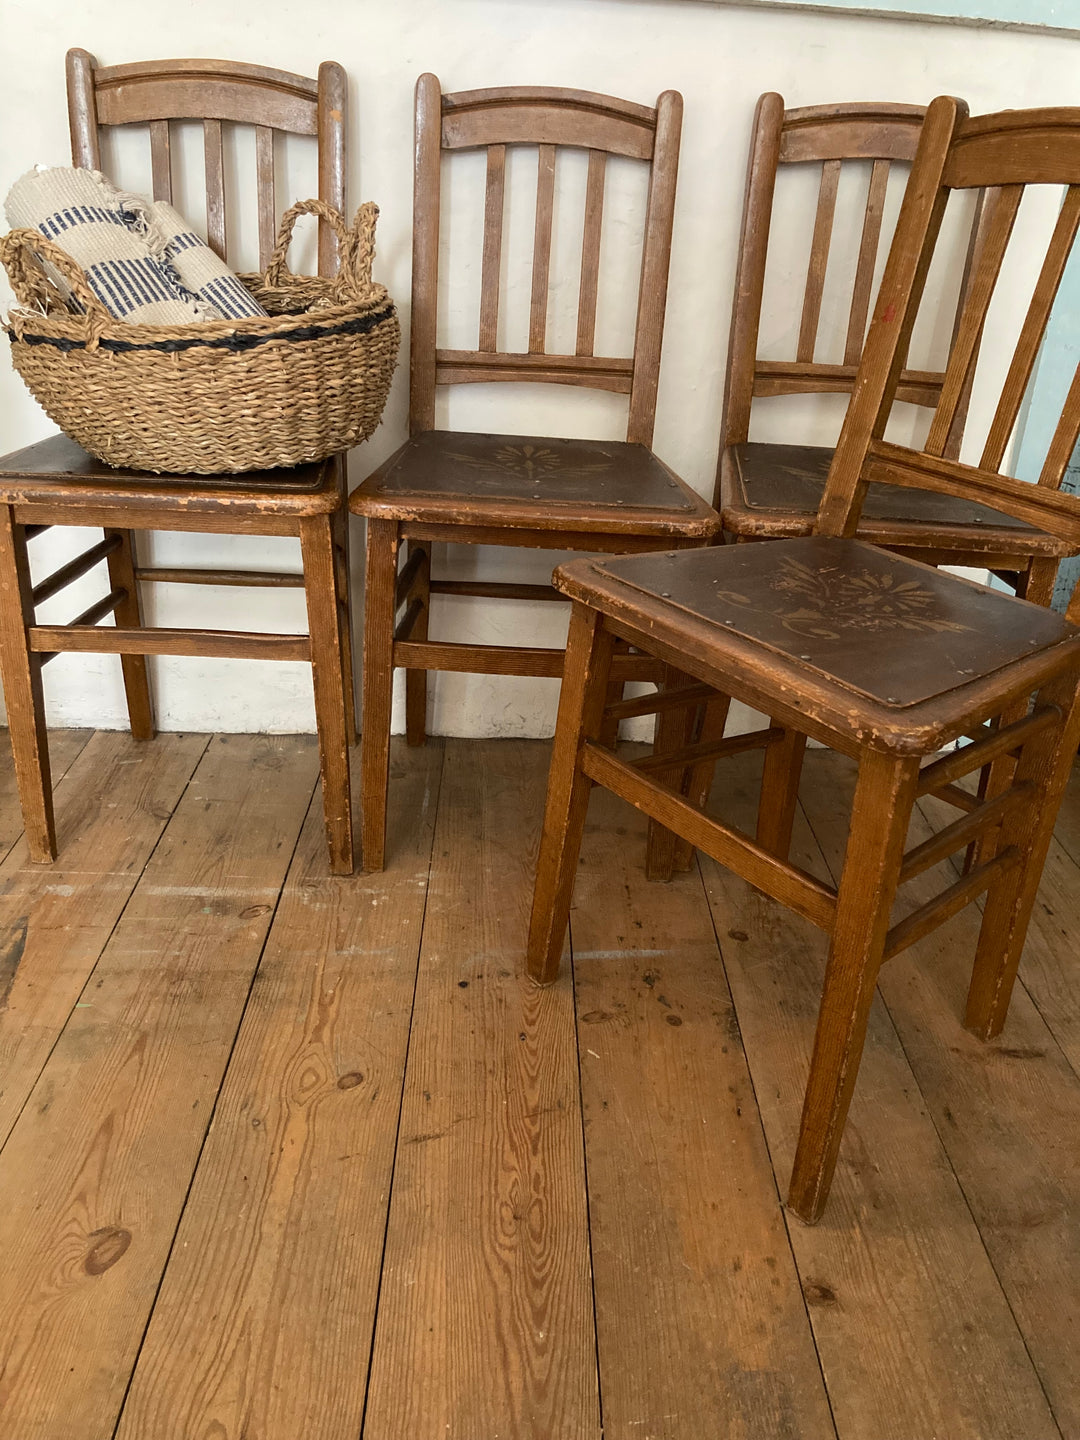 Scumble Painted Set of Four Victorian Dining Chairs with rustic jute basket